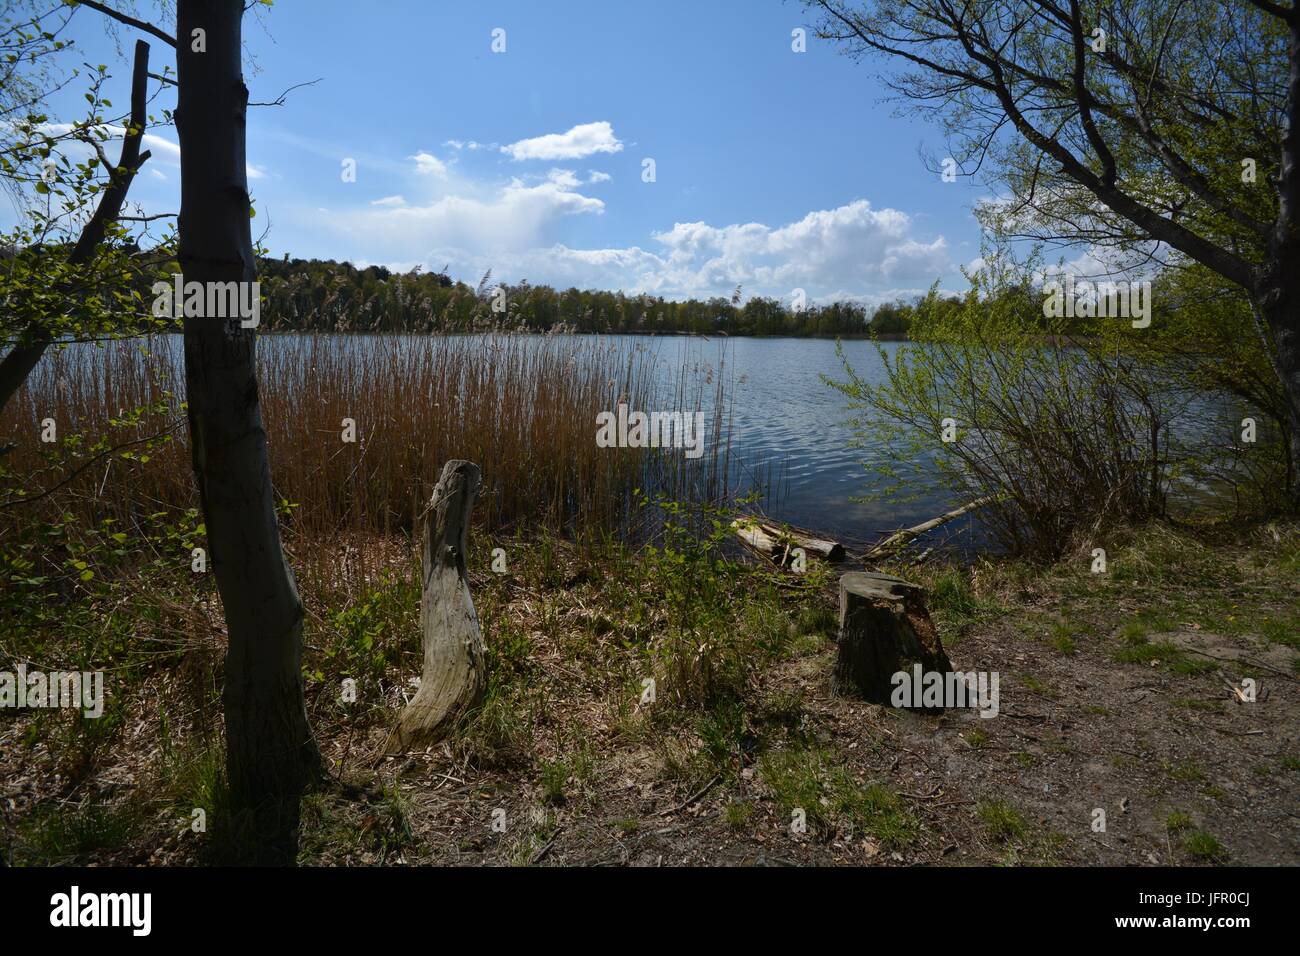 Impressions from New lake (Neuer See) in Falkensee (Brandenburg) from April 25, 2016, Germany Stock Photo